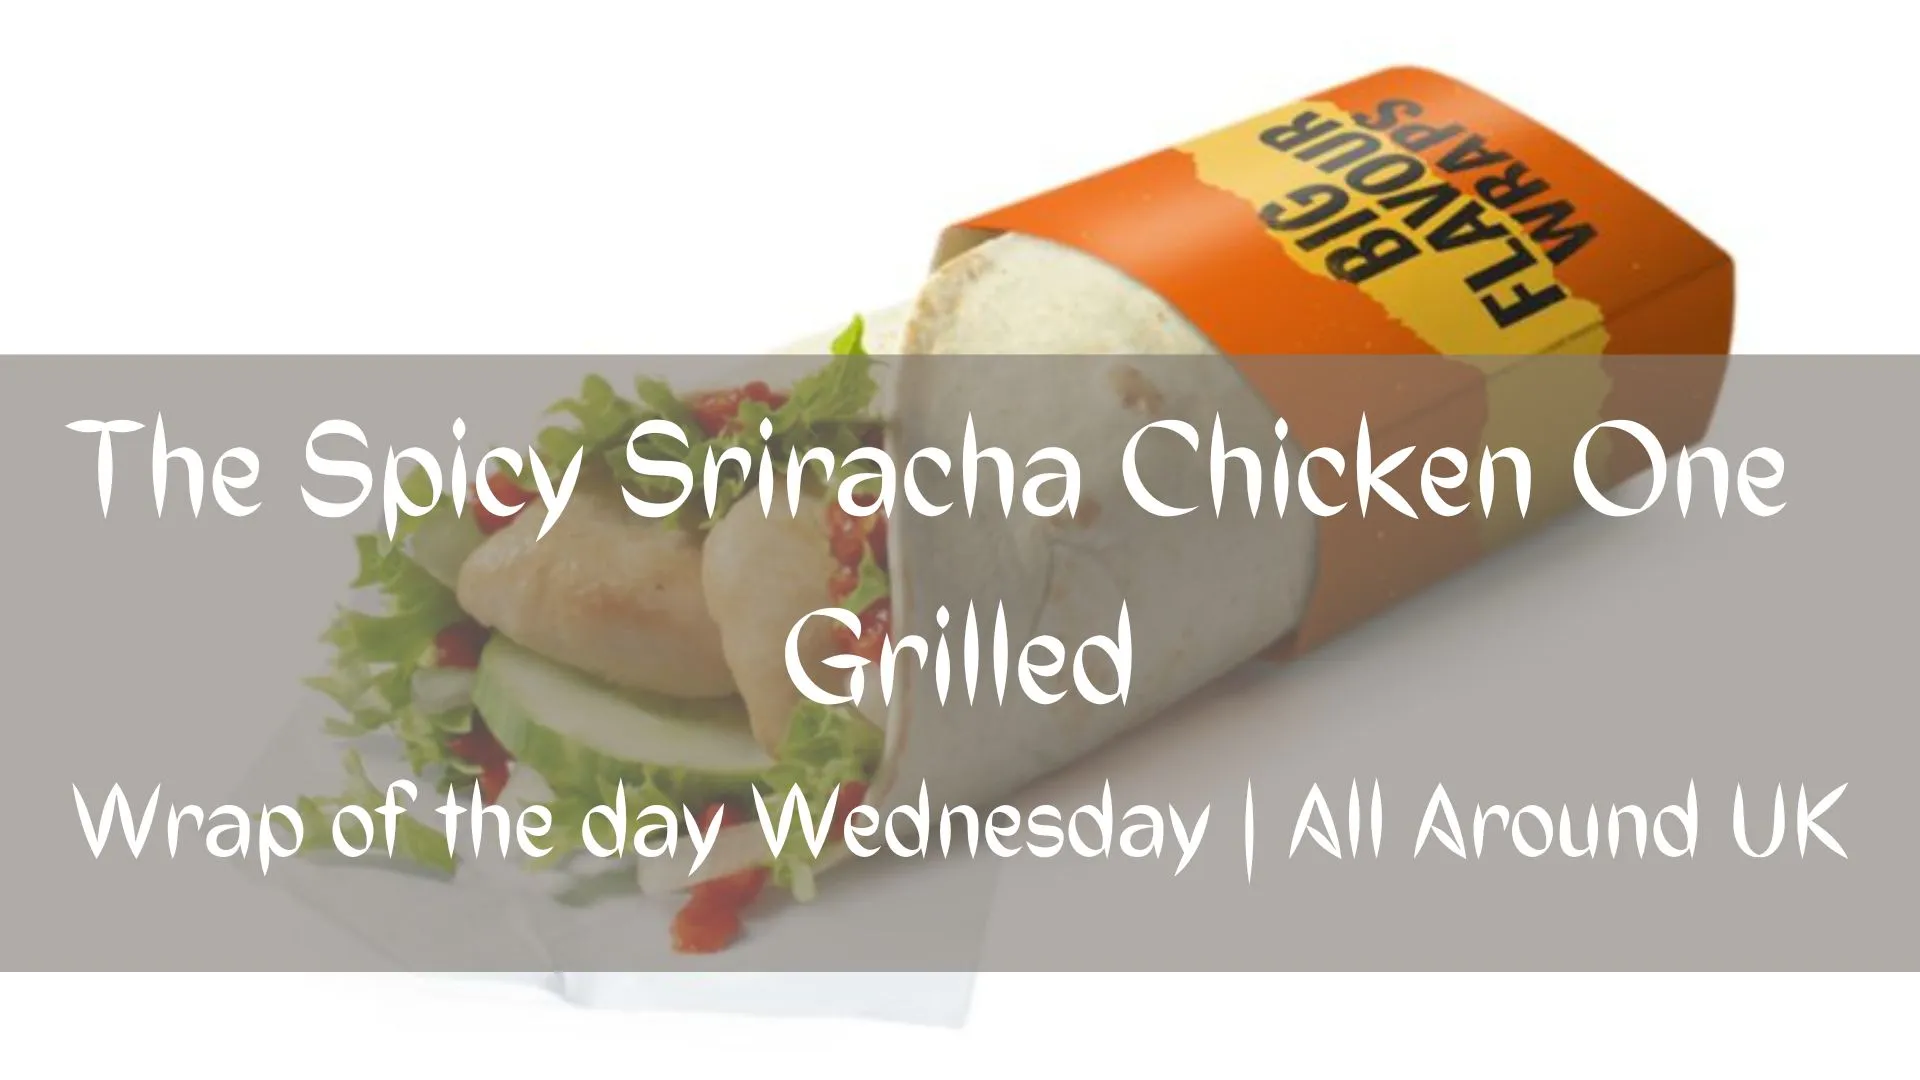 The-Spicy-Sriracha-Chicken-One-grilled